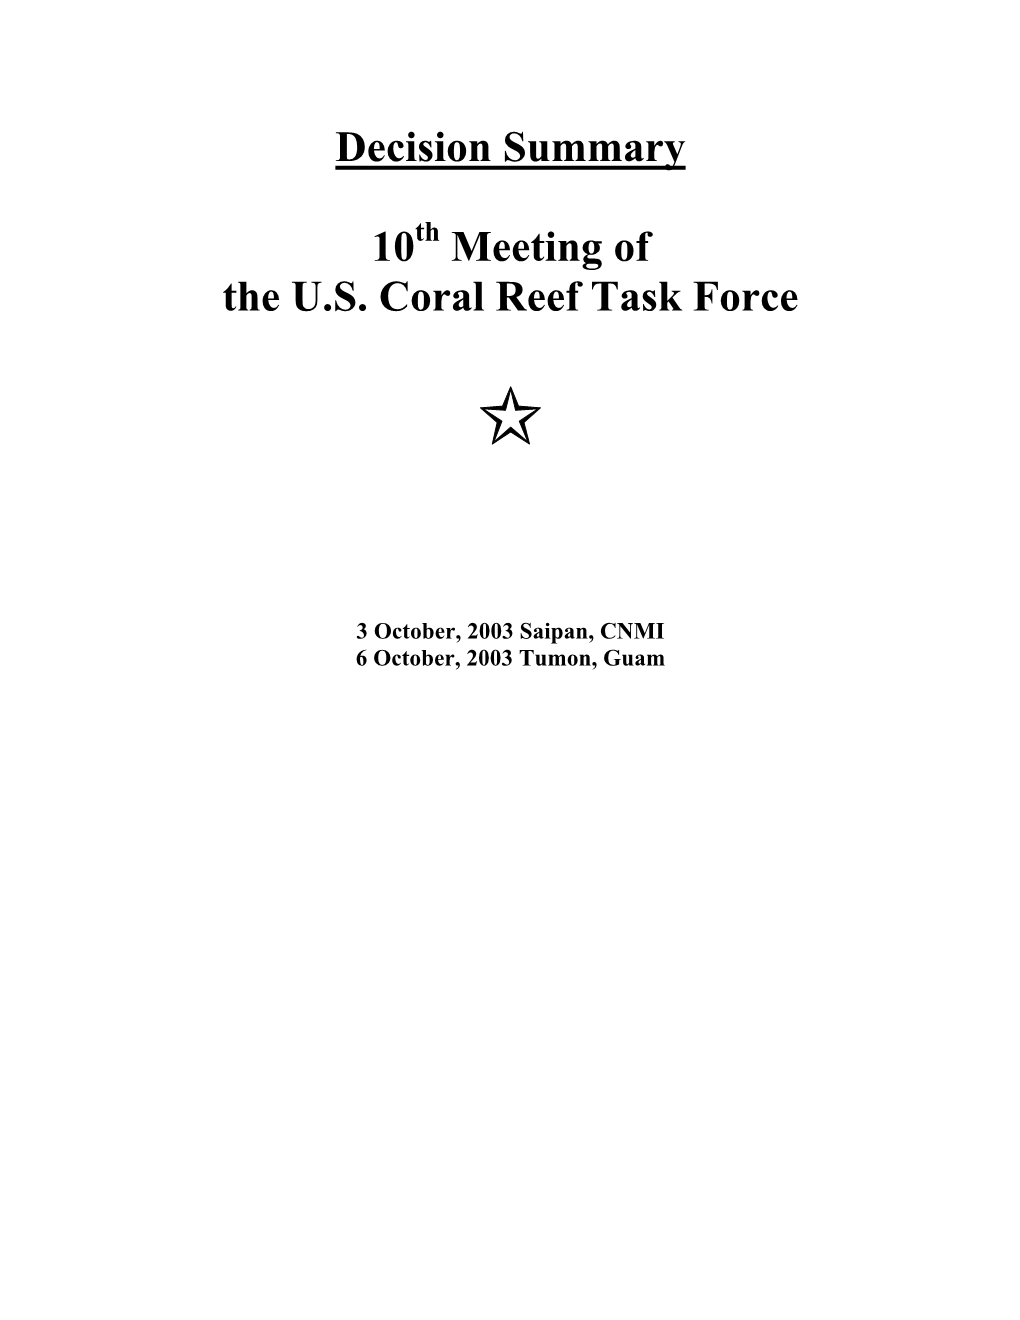 Decision Summary of the 10Th CRTF Meeting